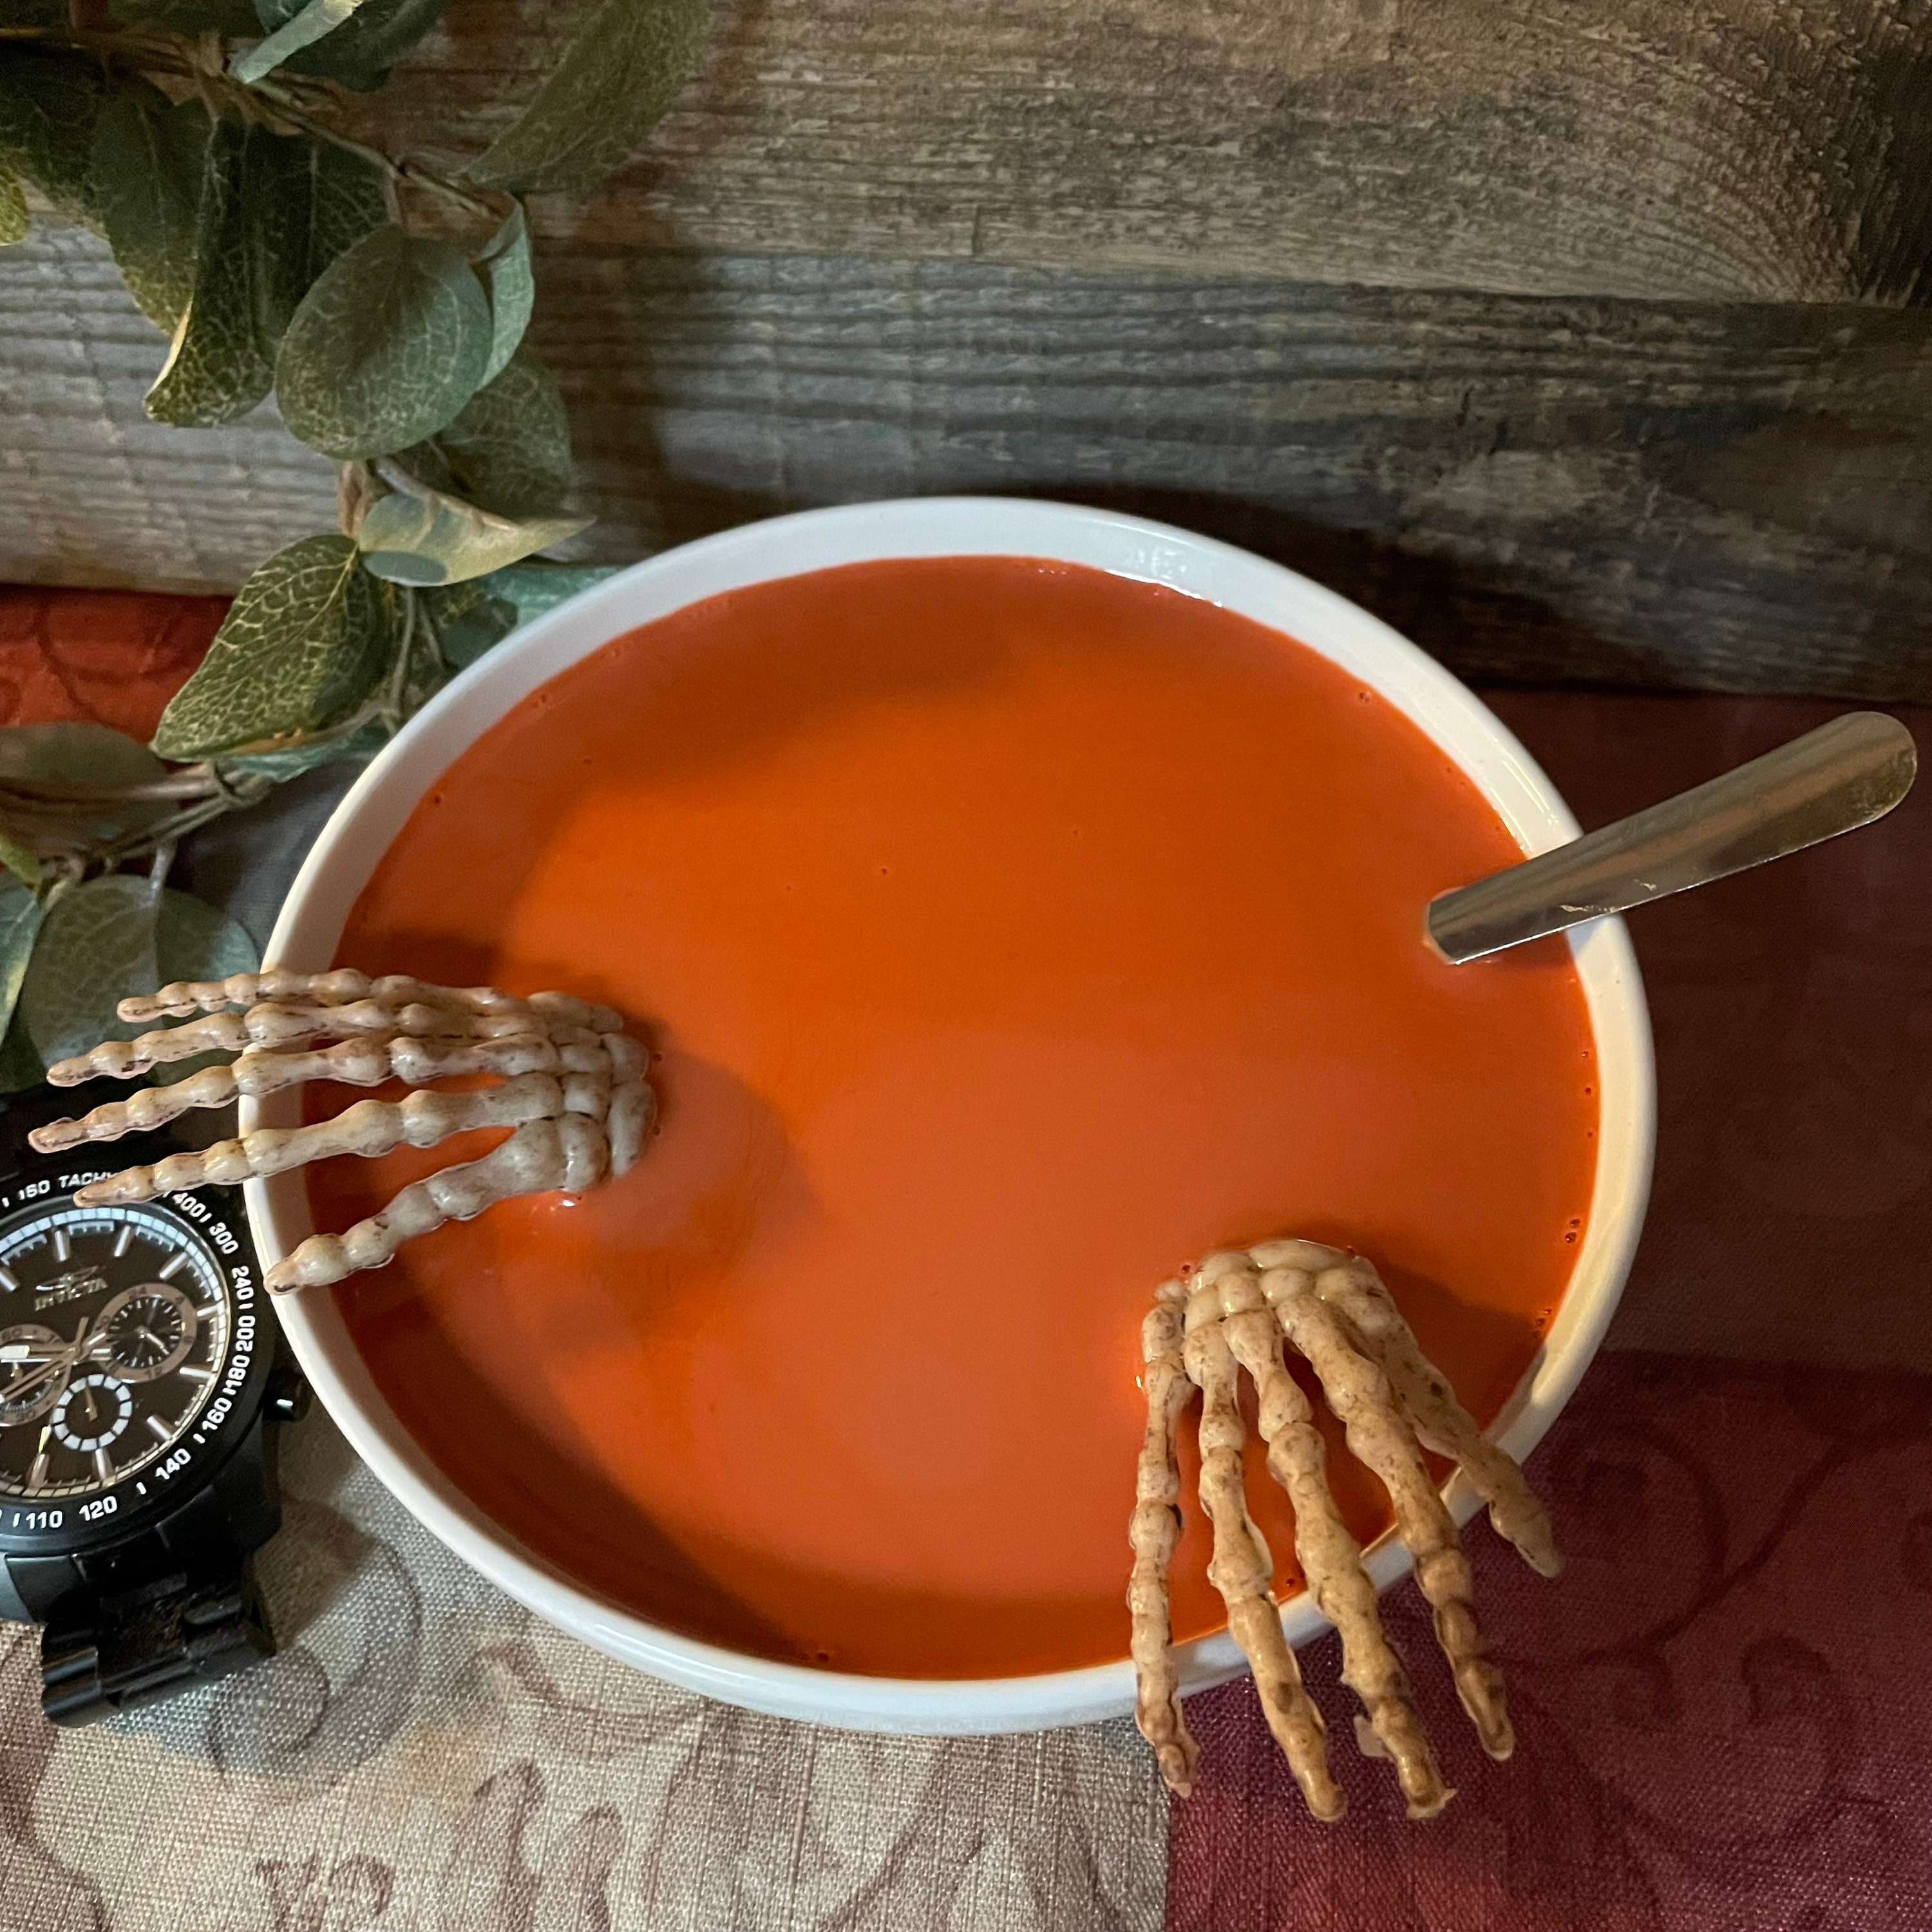 Bowl Of Tomato Soup With Creepy Skeleton Hands Fake Food Halloween Photo Staging Prop